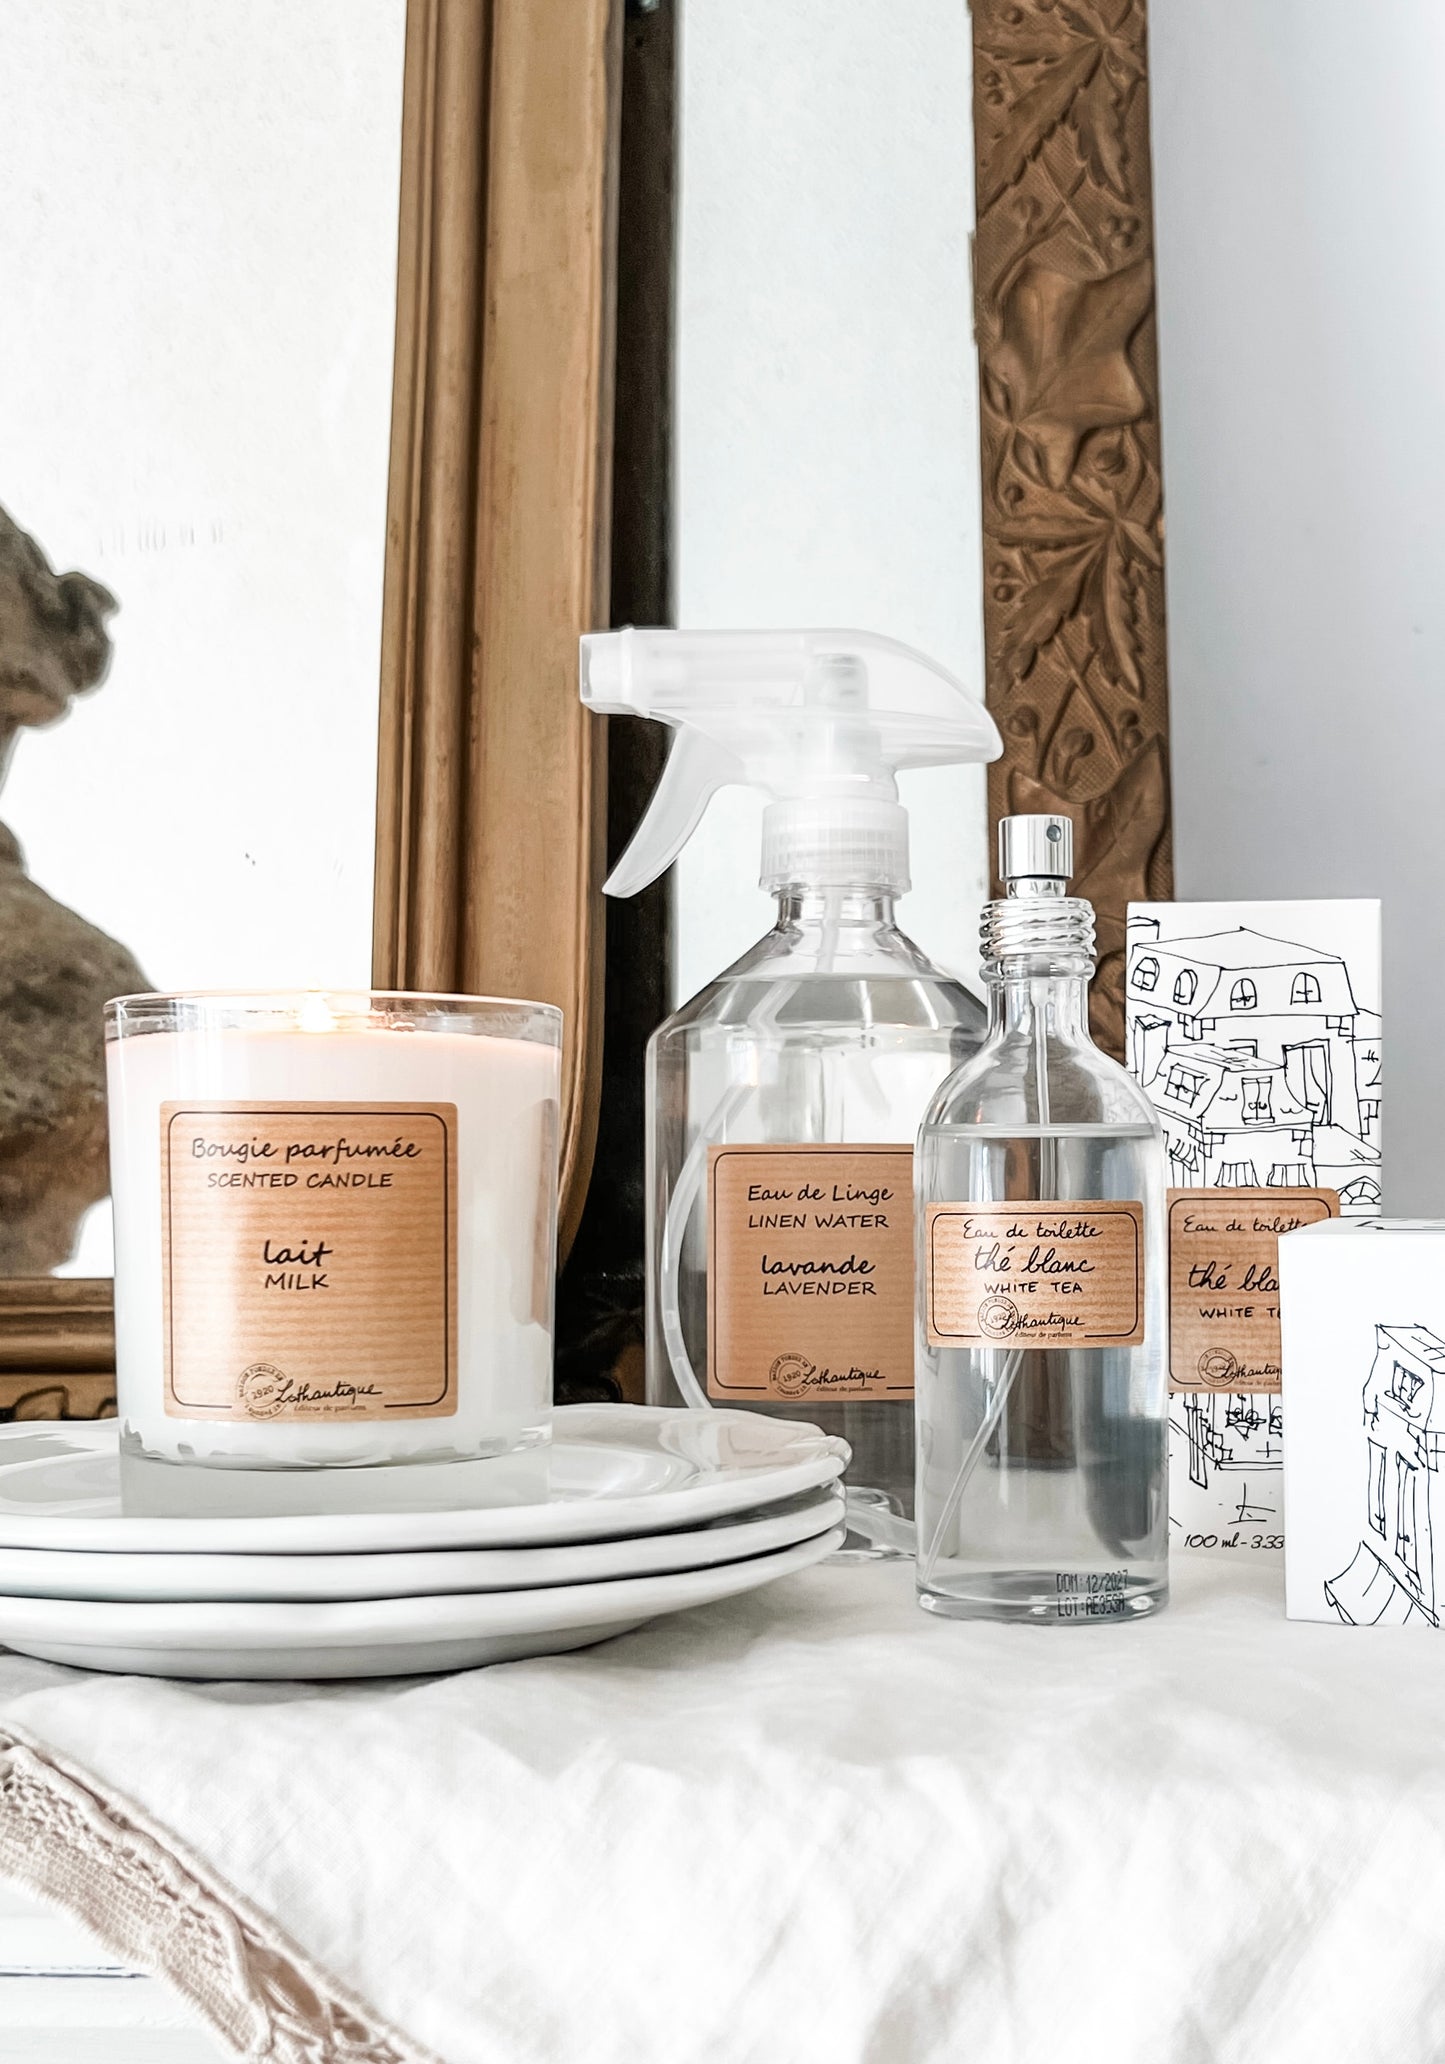 Lothantique French Candle -Milk